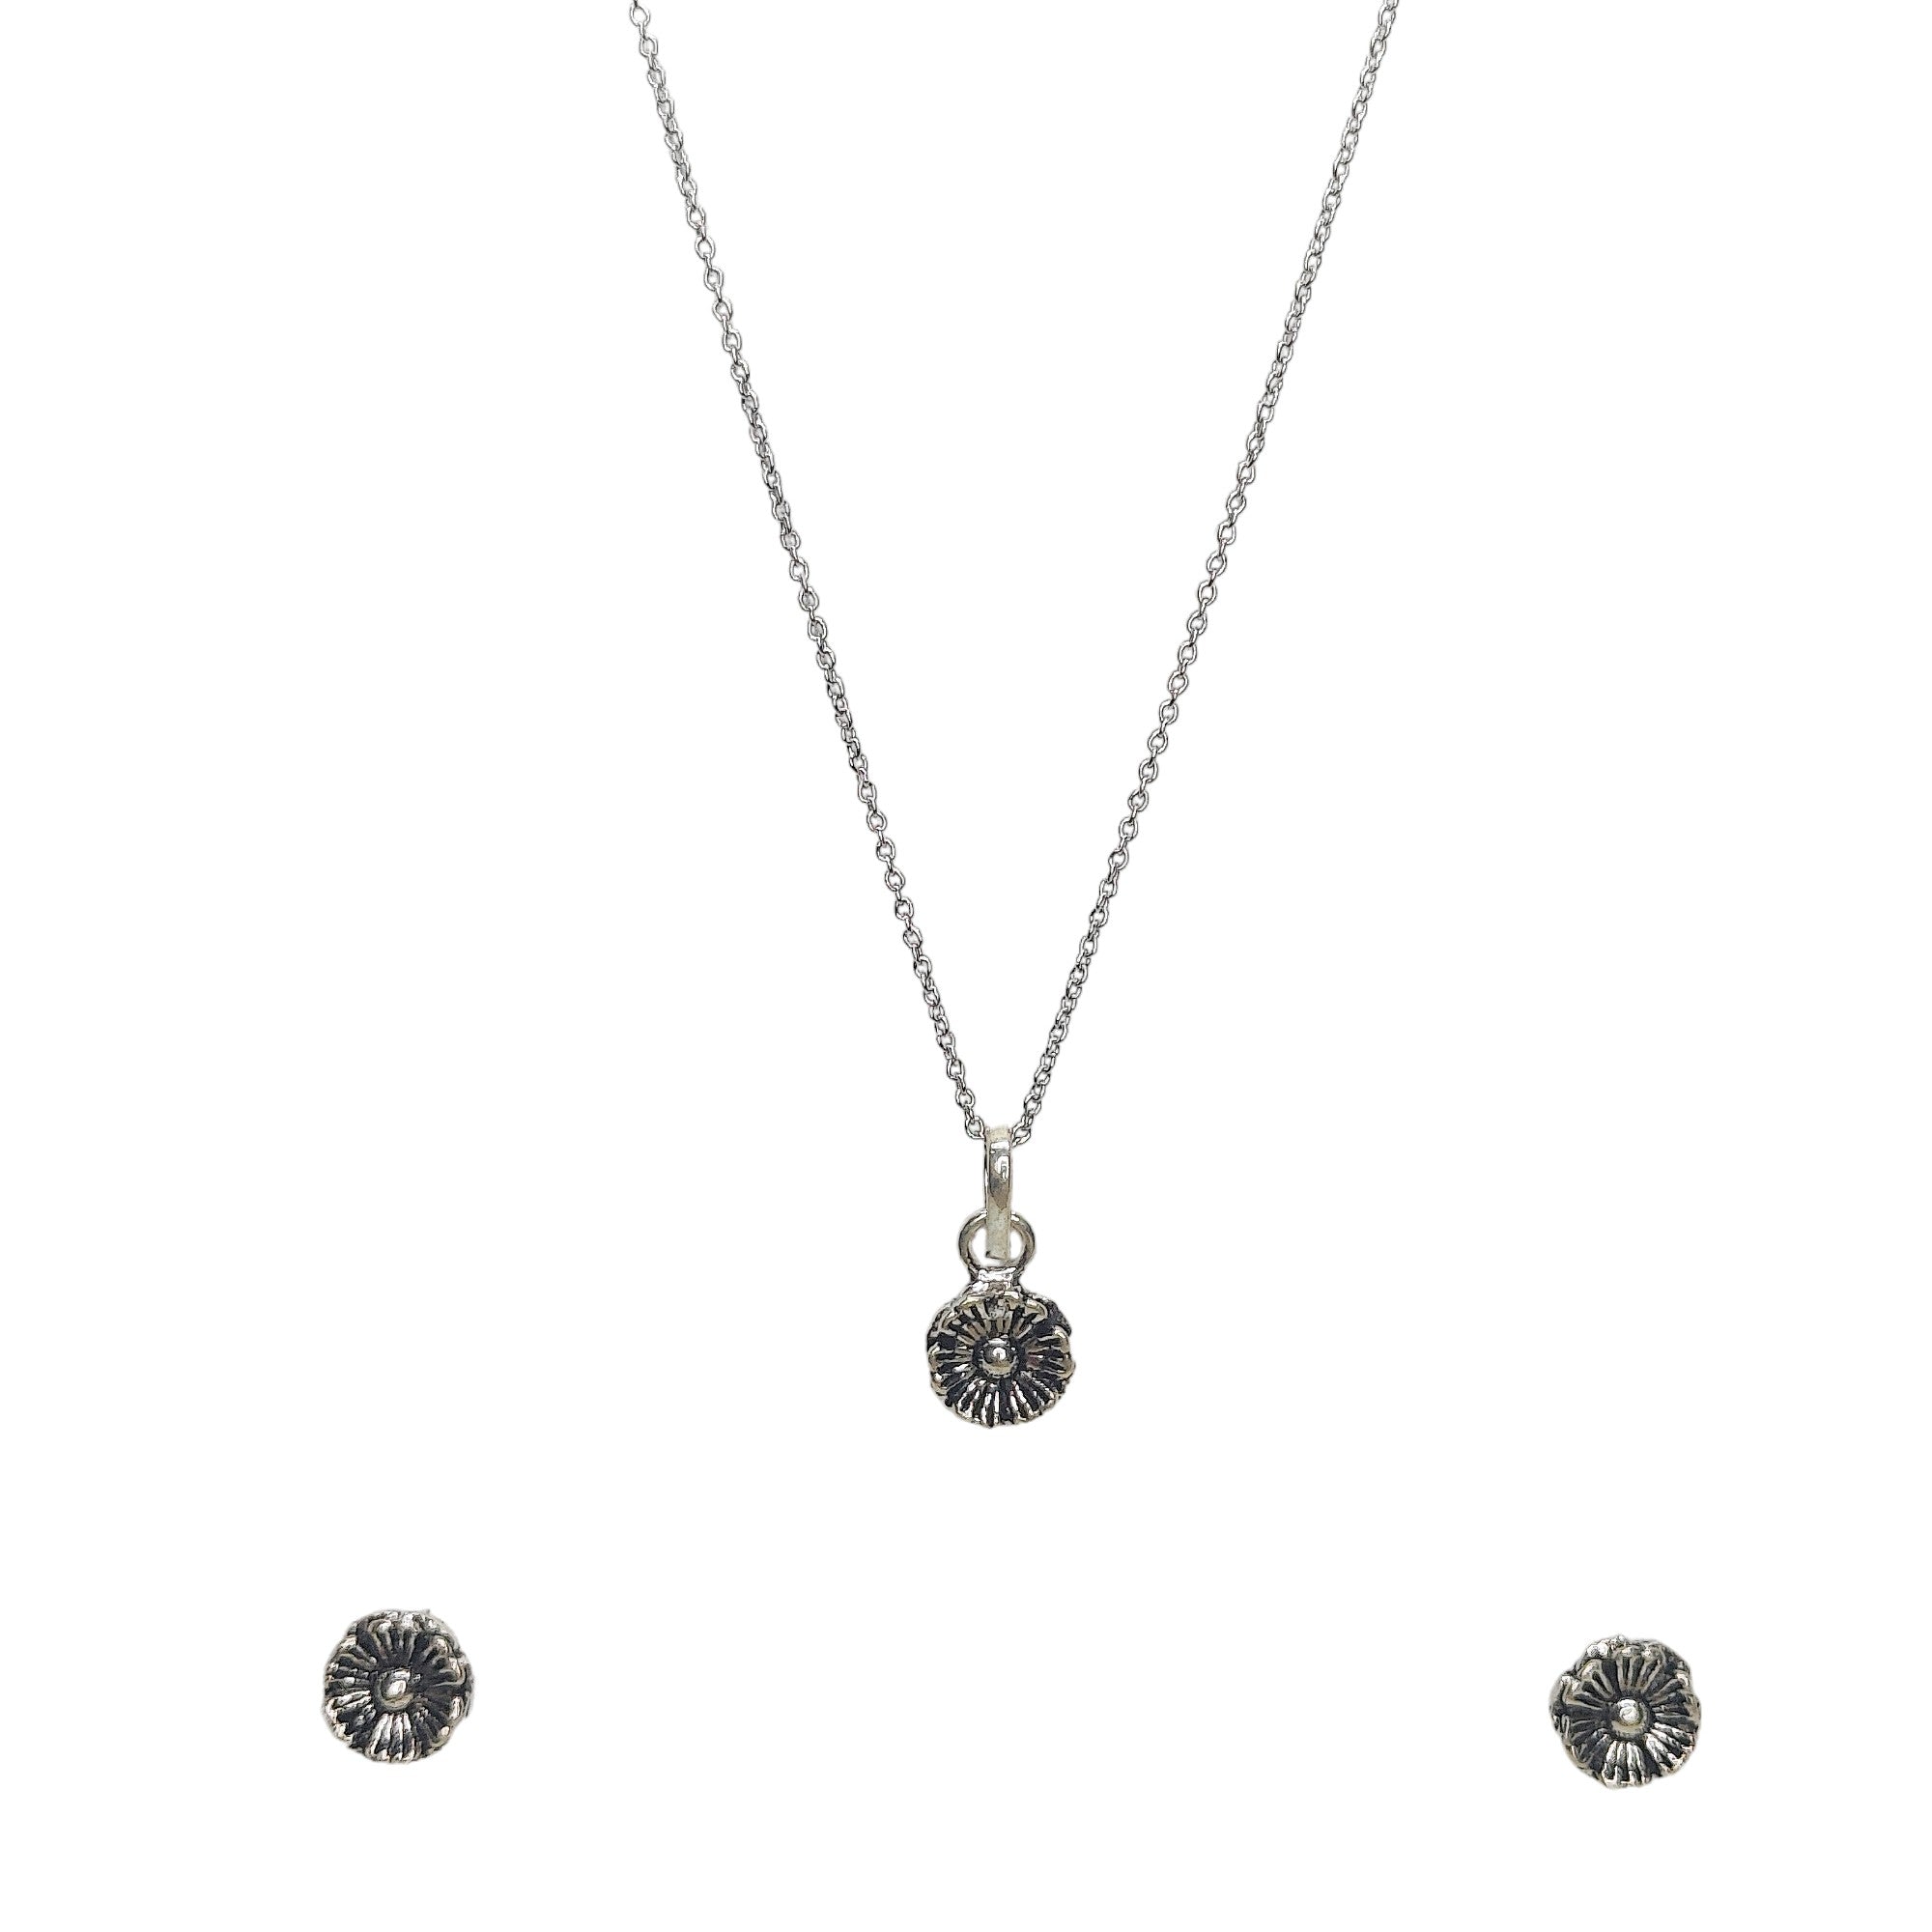 Oxidized Silver Flower Pendent Set With Chain For Women - Rivansh